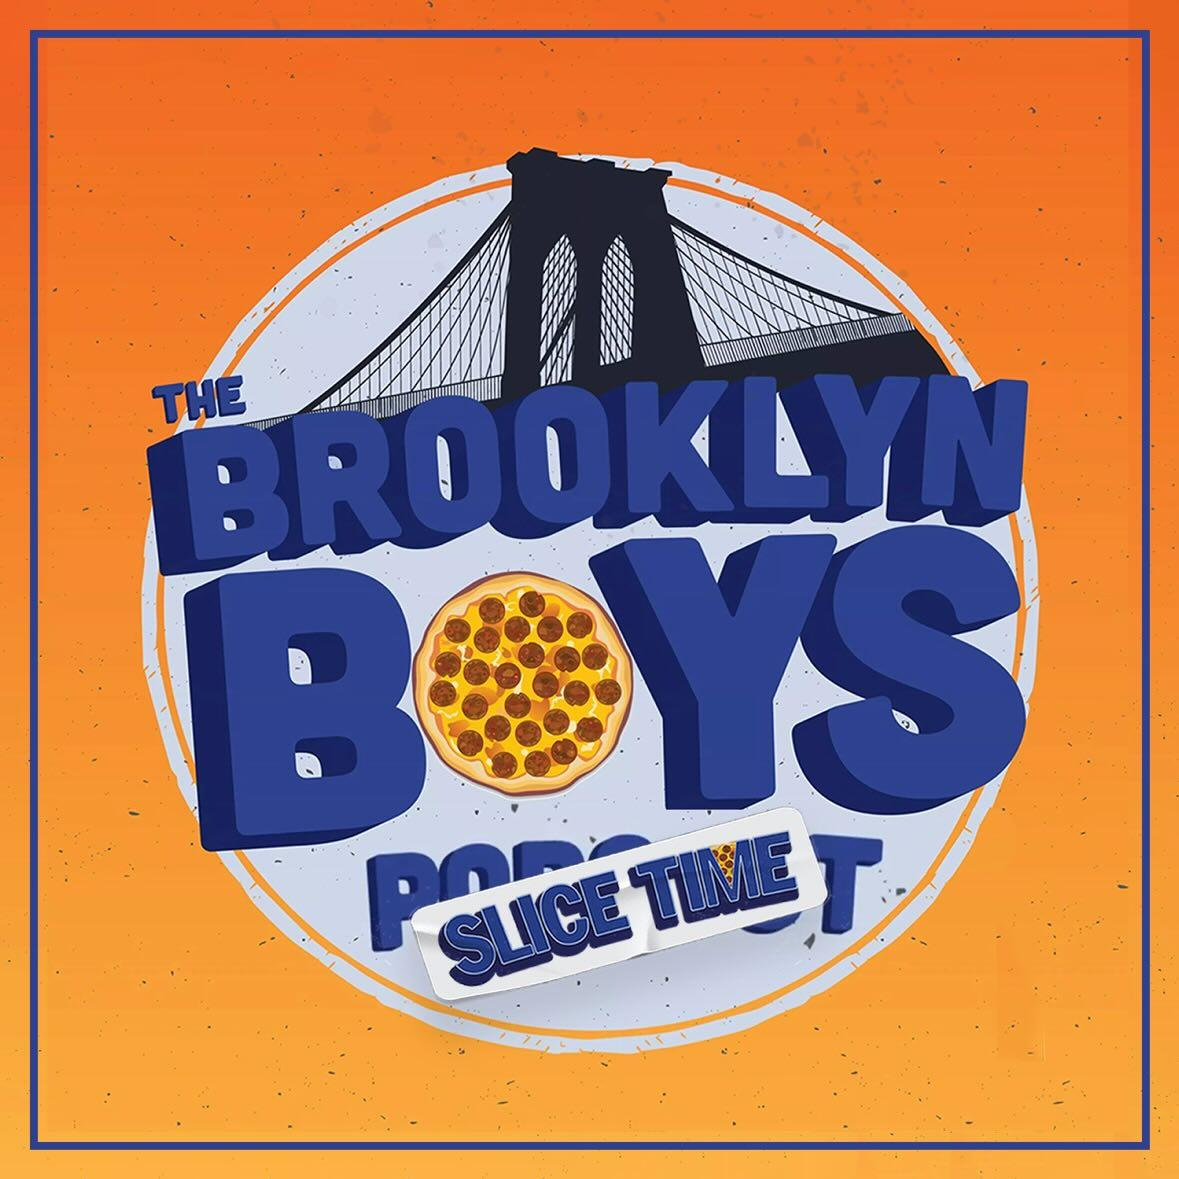 The Brooklyn Boys SLICE TIME for Ep. #280